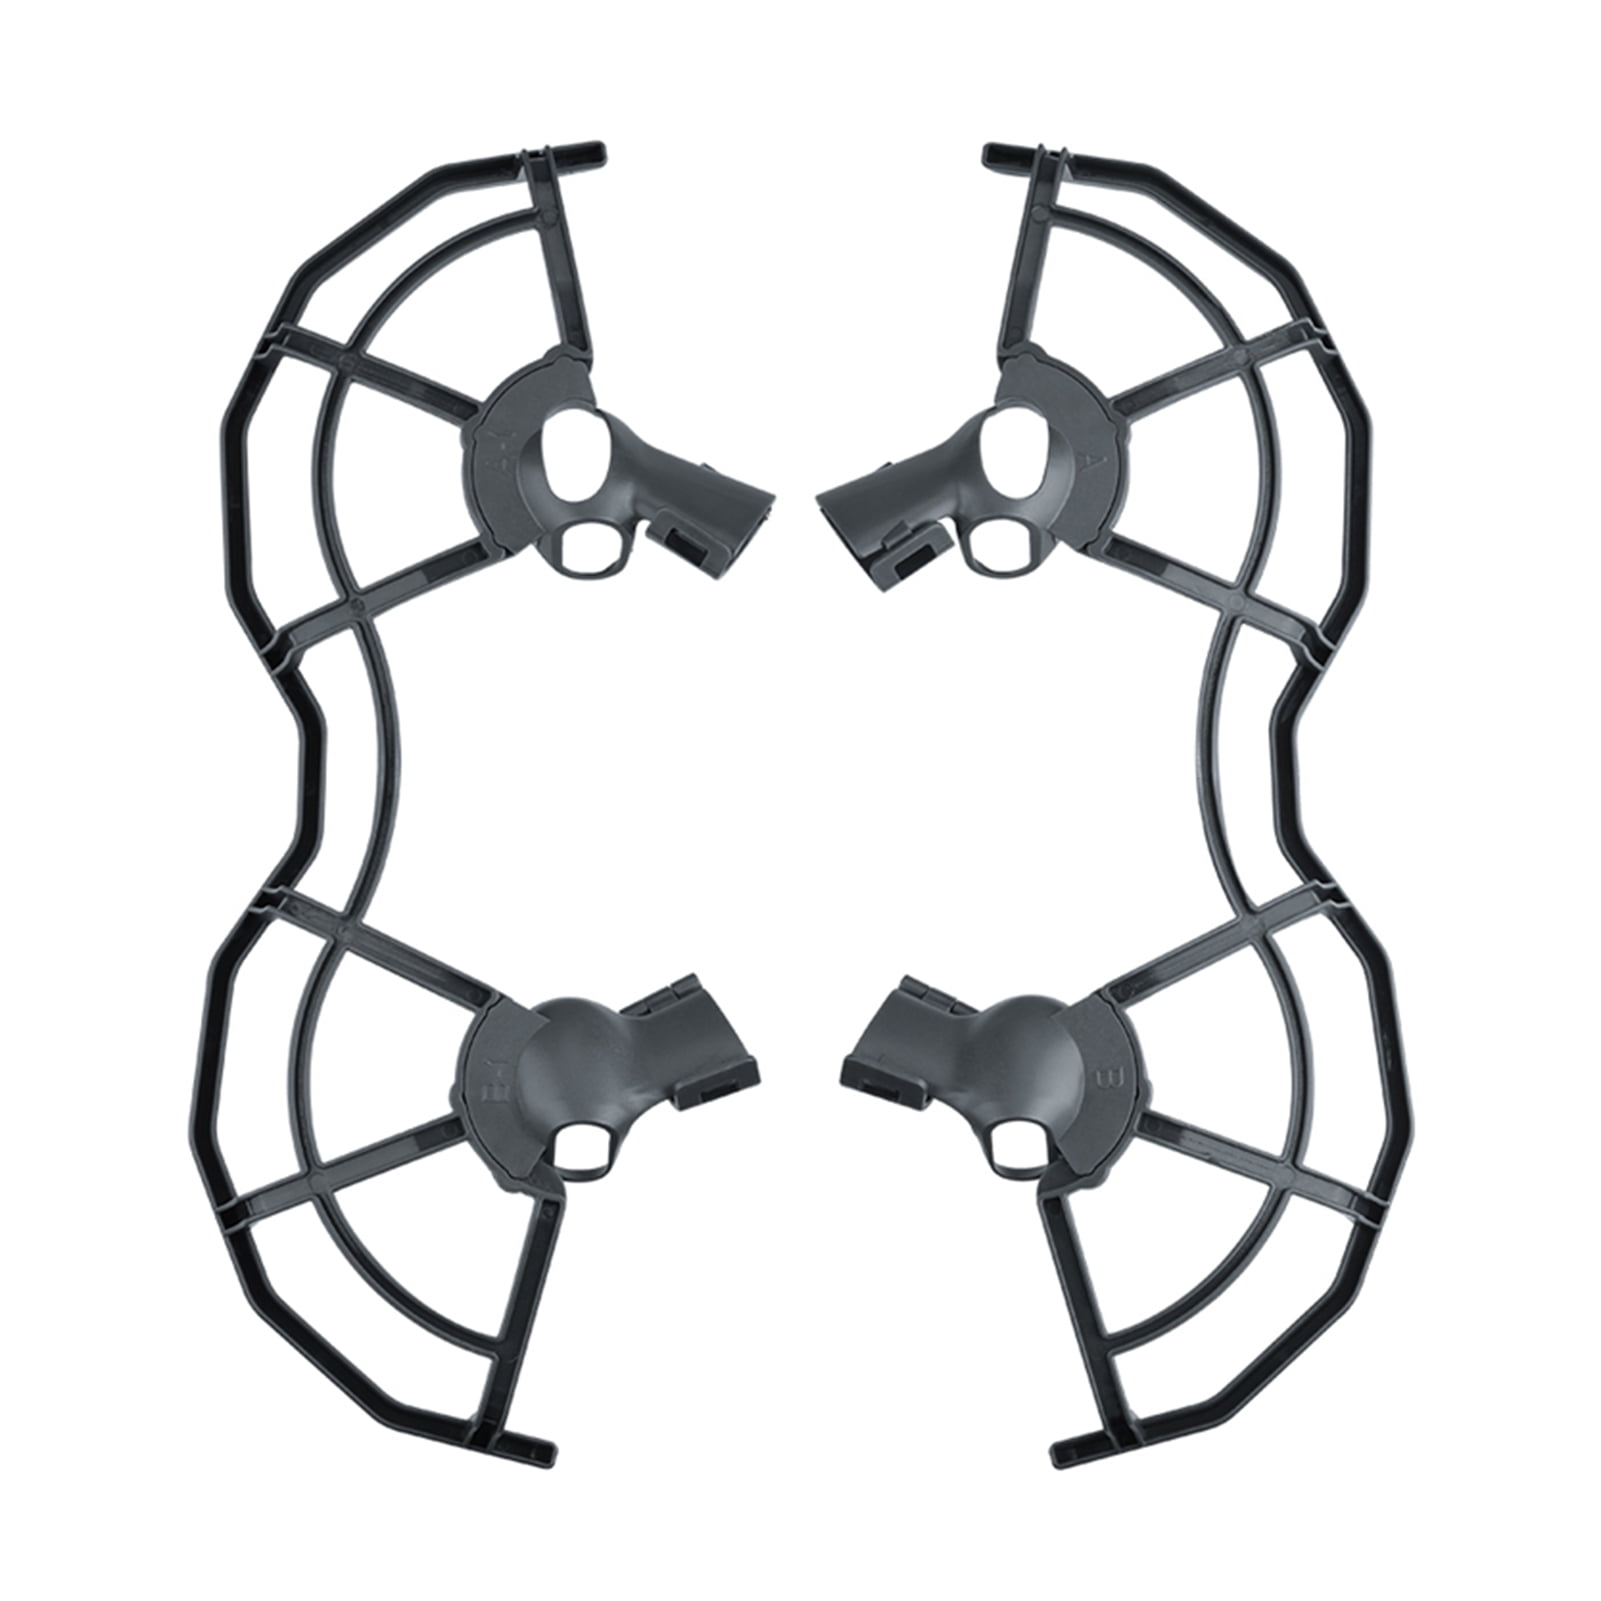 4x Propeller Guard Protective Cover Ring Prop Guard for DJI FPV Combo Drone Part 